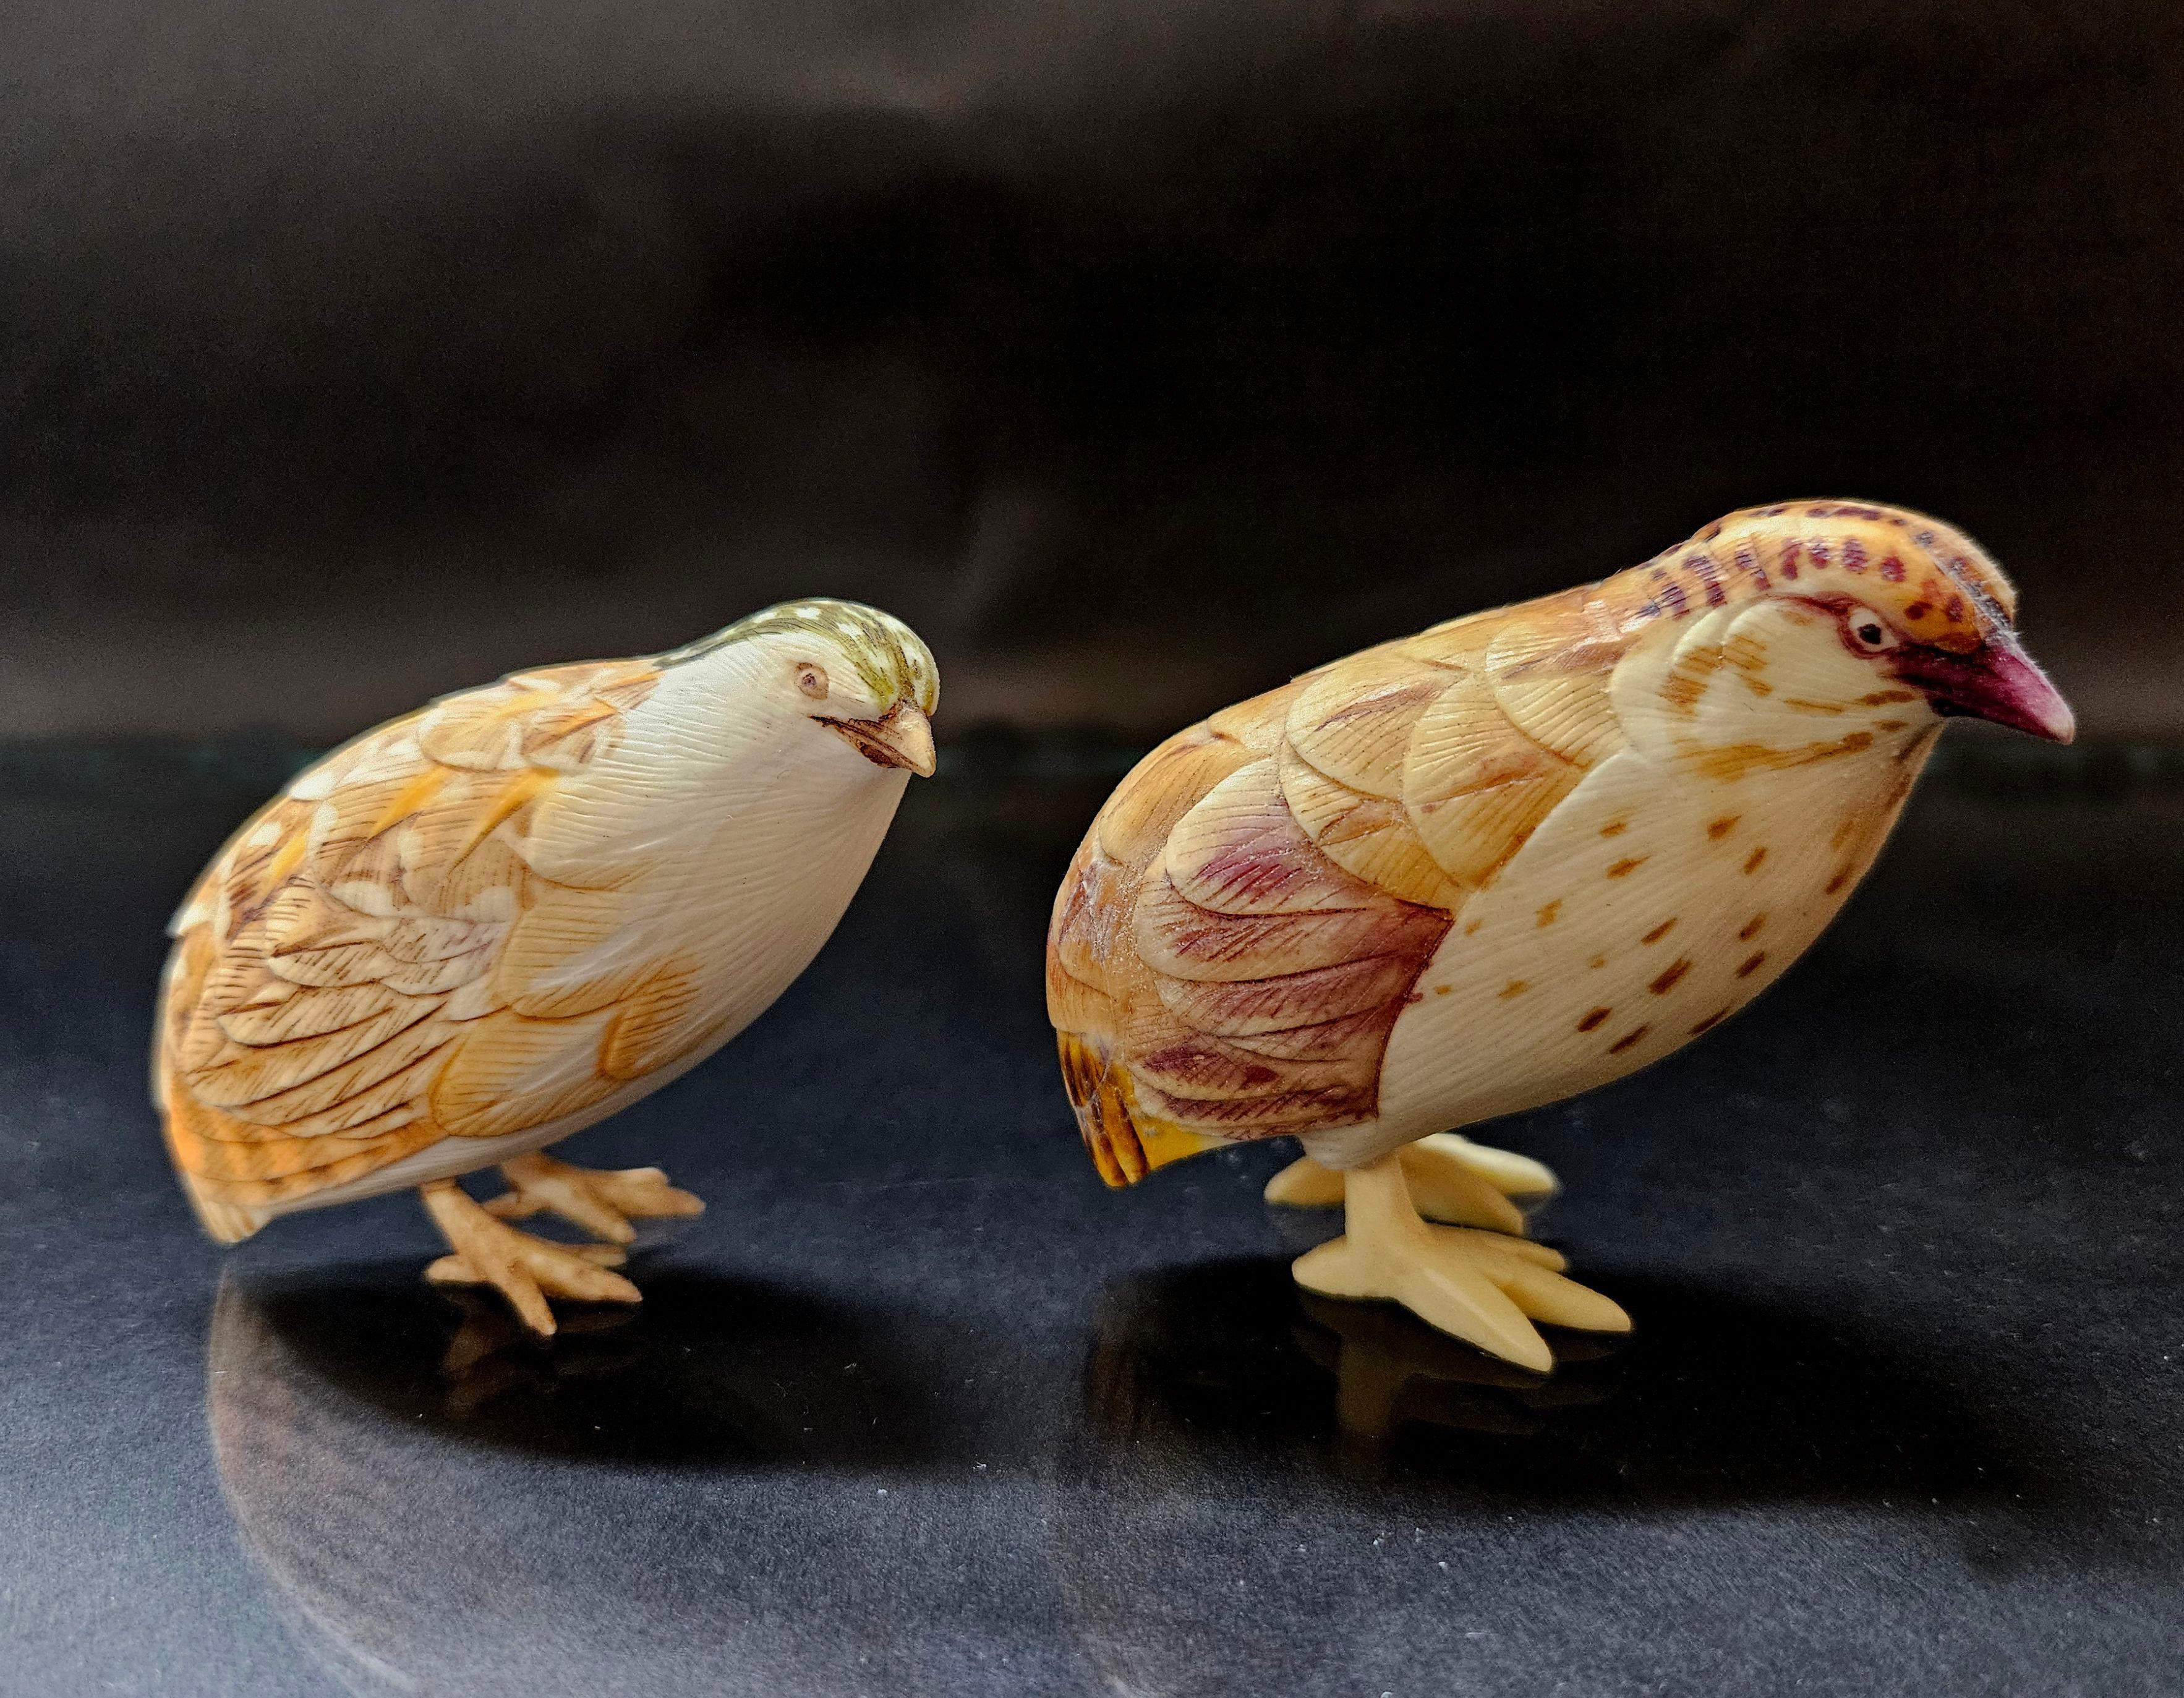 Japanese Carved Okimono Polychrome Birds, Signed by Tenzan (天山) on the bottom, Meiji Period.
A truly hand-carved ivory figure with fine craftsmanship in a detailed carving

Dimension:
Large: 2.75